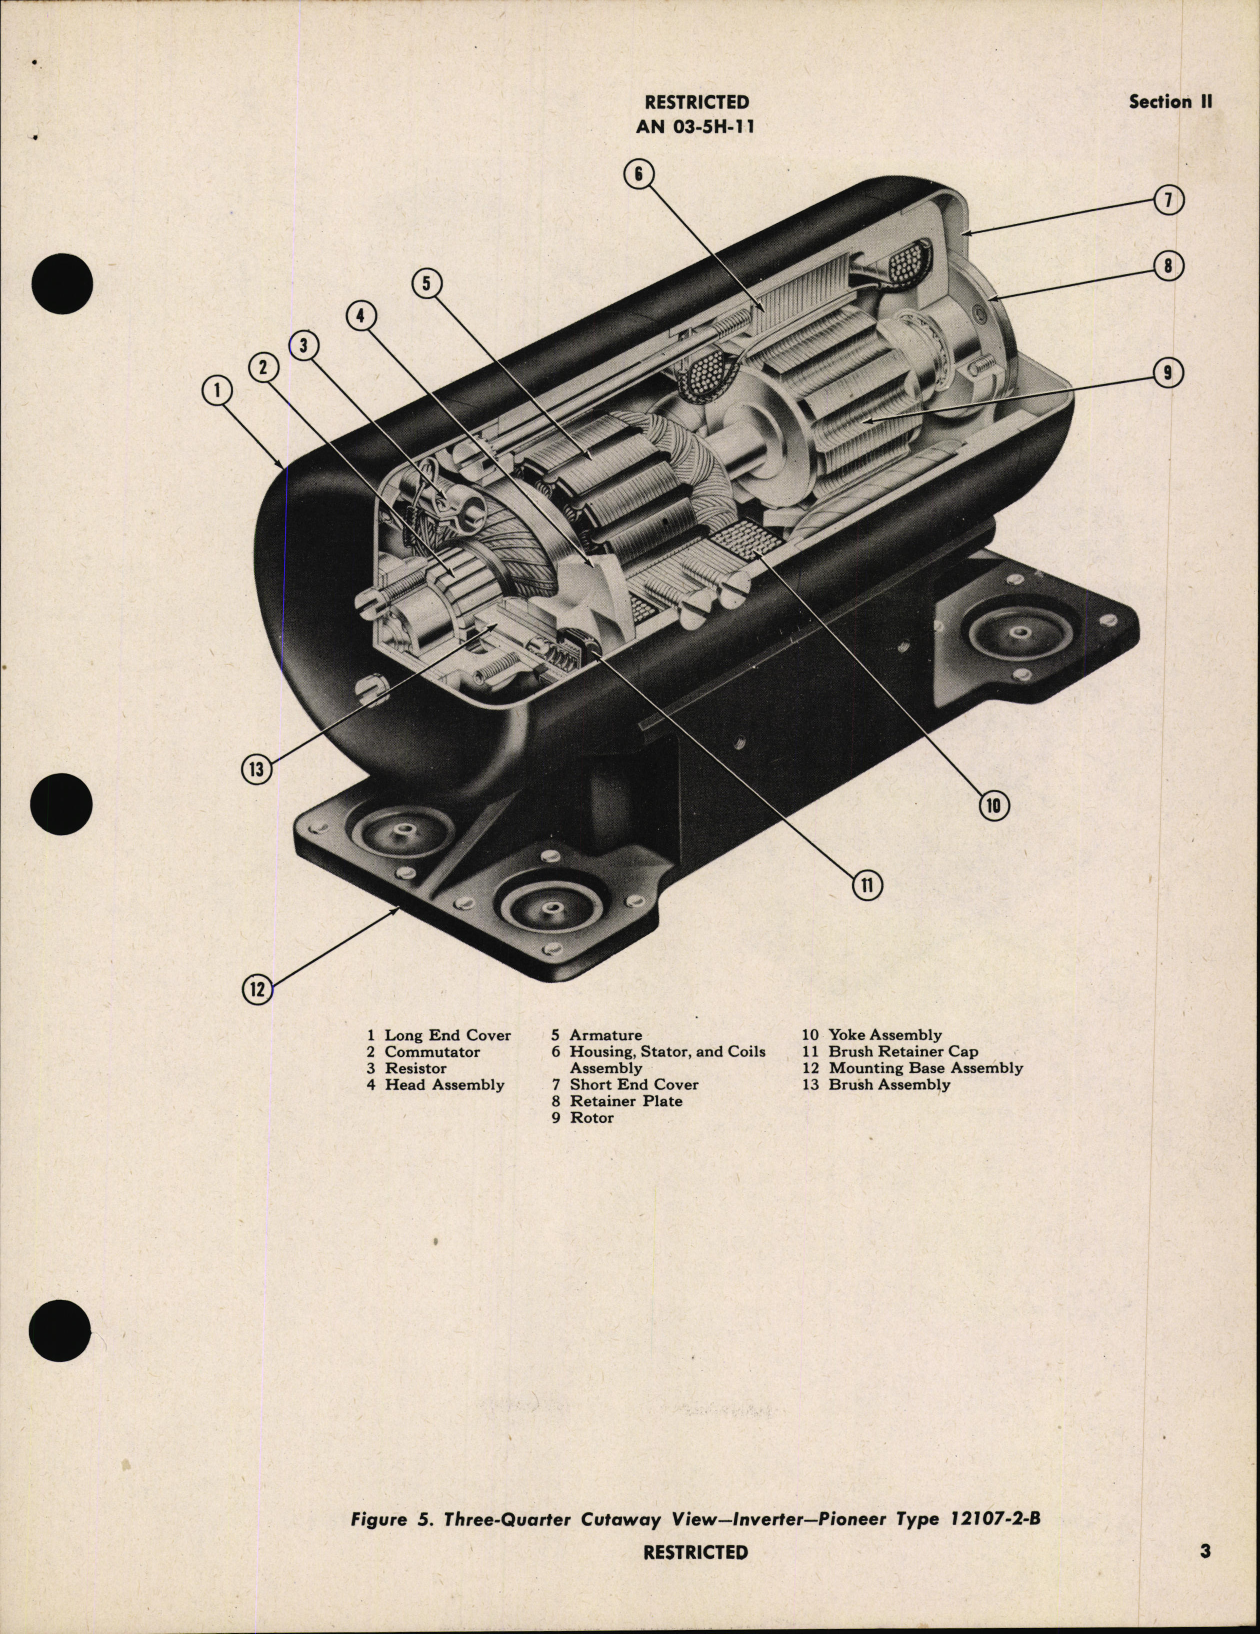 Sample page 7 from AirCorps Library document: Handbook of Instructions with Parts Catalog for Inverters